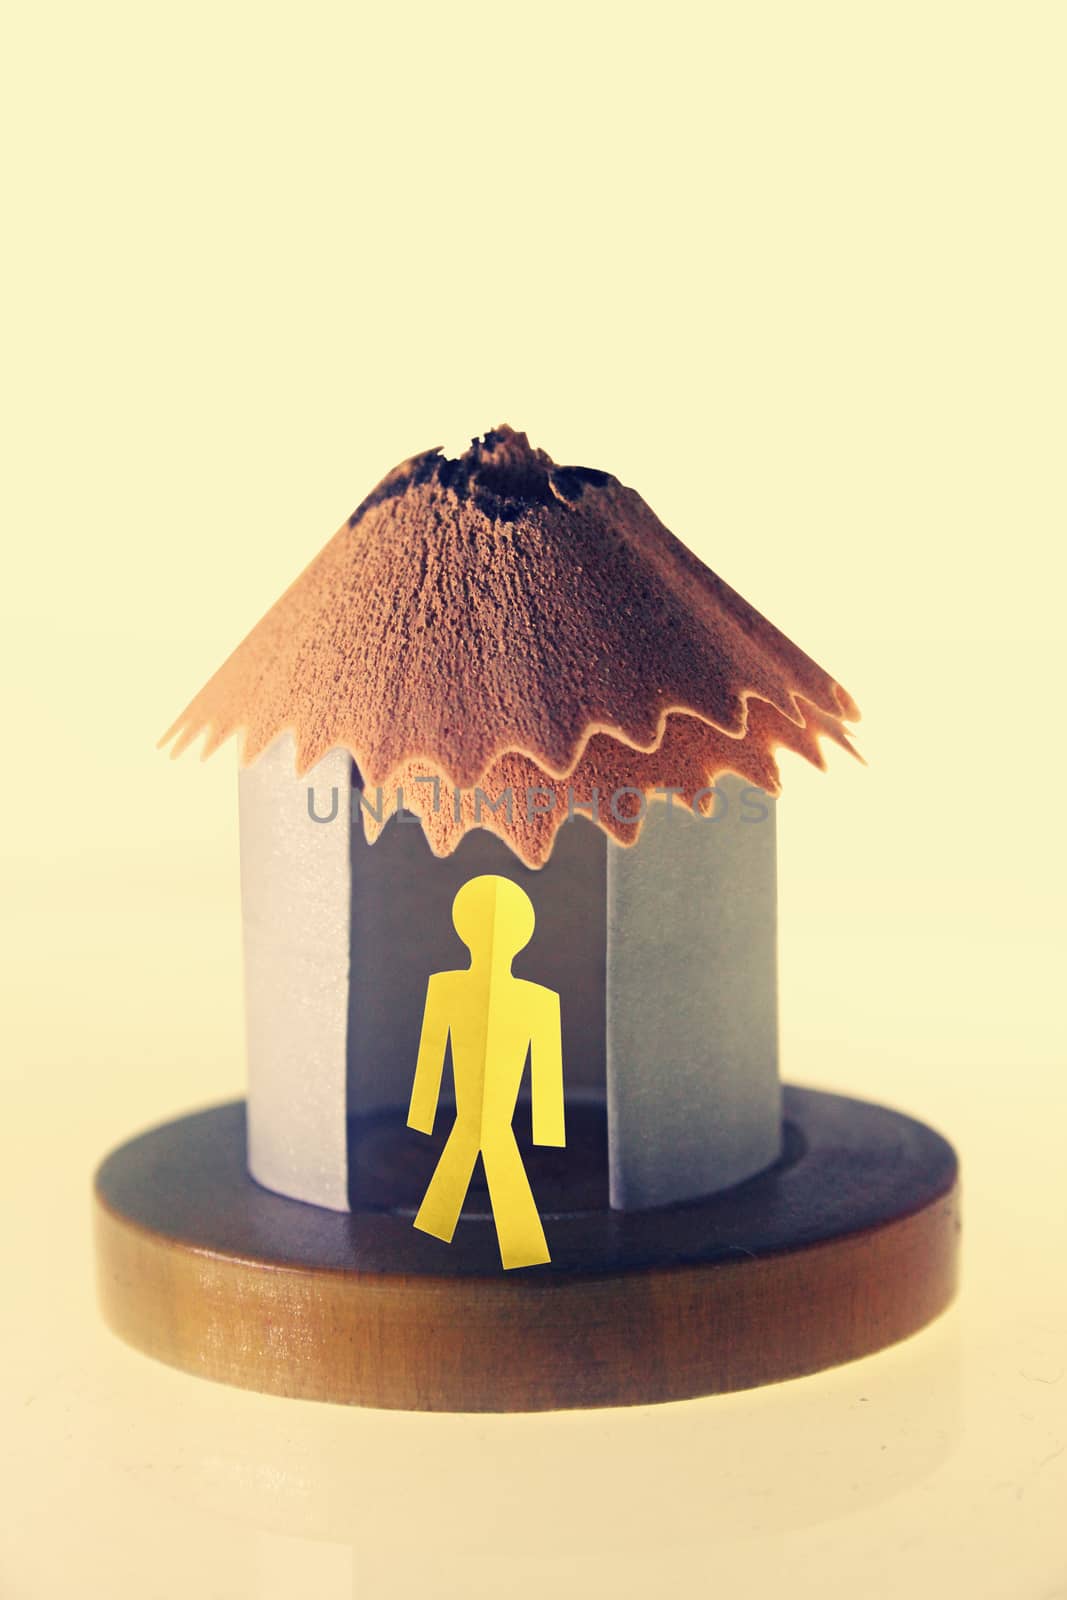 Paper house with paperman, Concept